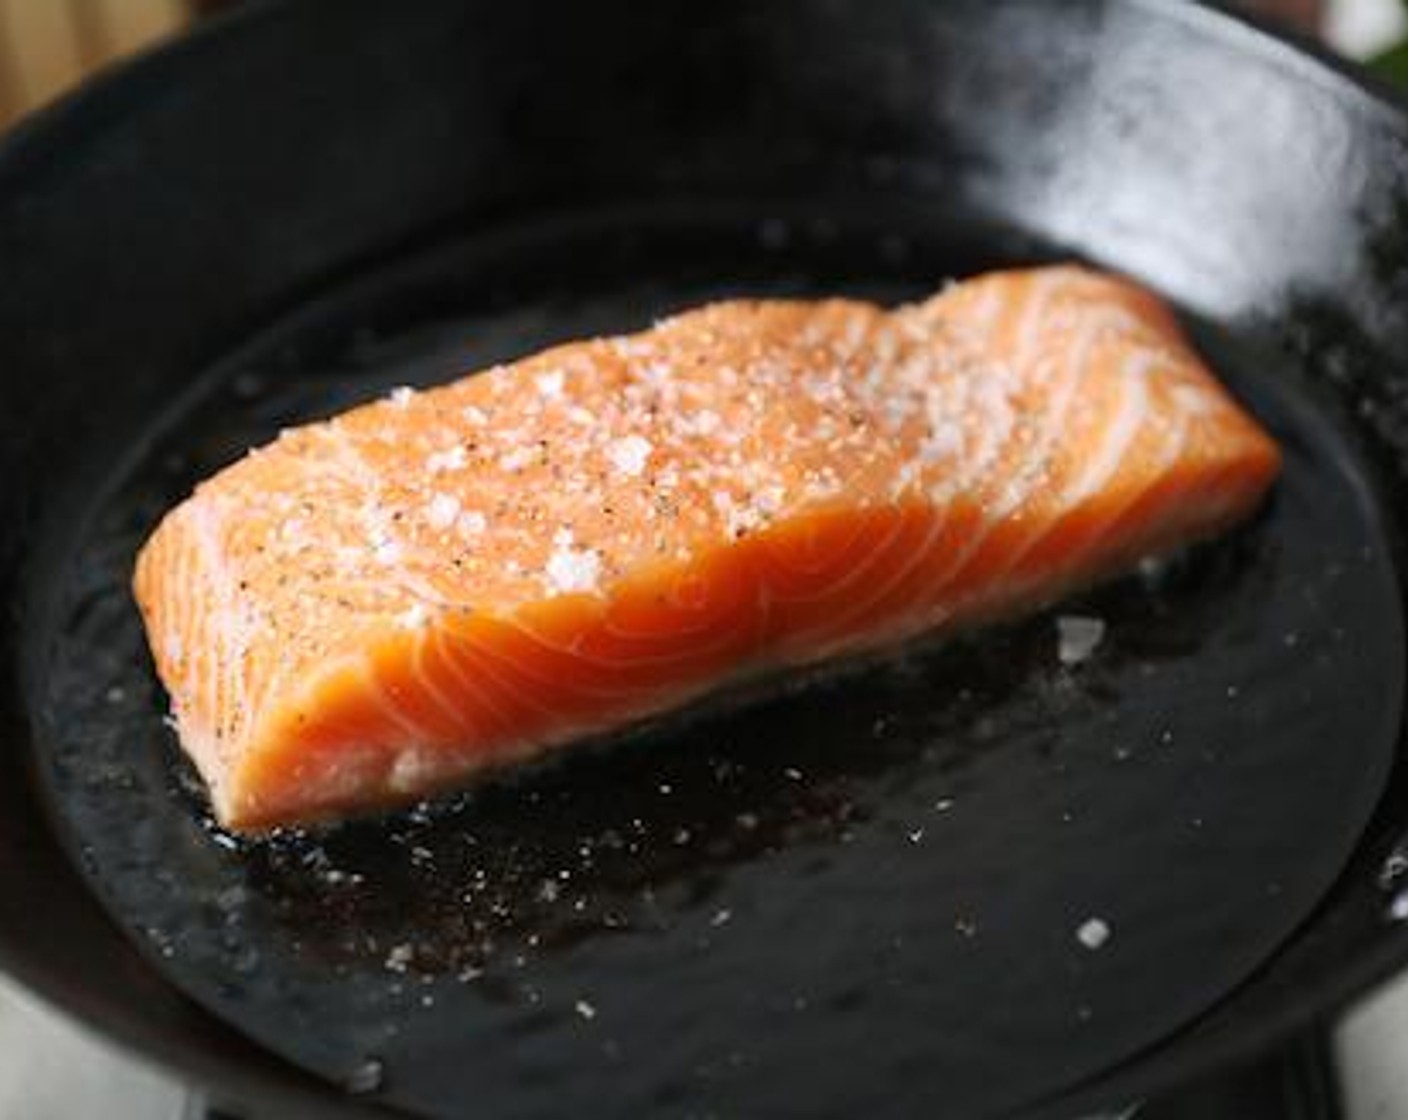 step 3 Immediately after adding the oil, lay the skin-side of the salmon fillet down away from you. Season the top with Kosher Salt (1 pinch) and Freshly Ground Black Pepper (1 pinch). Cook for 3 to 4 minutes.